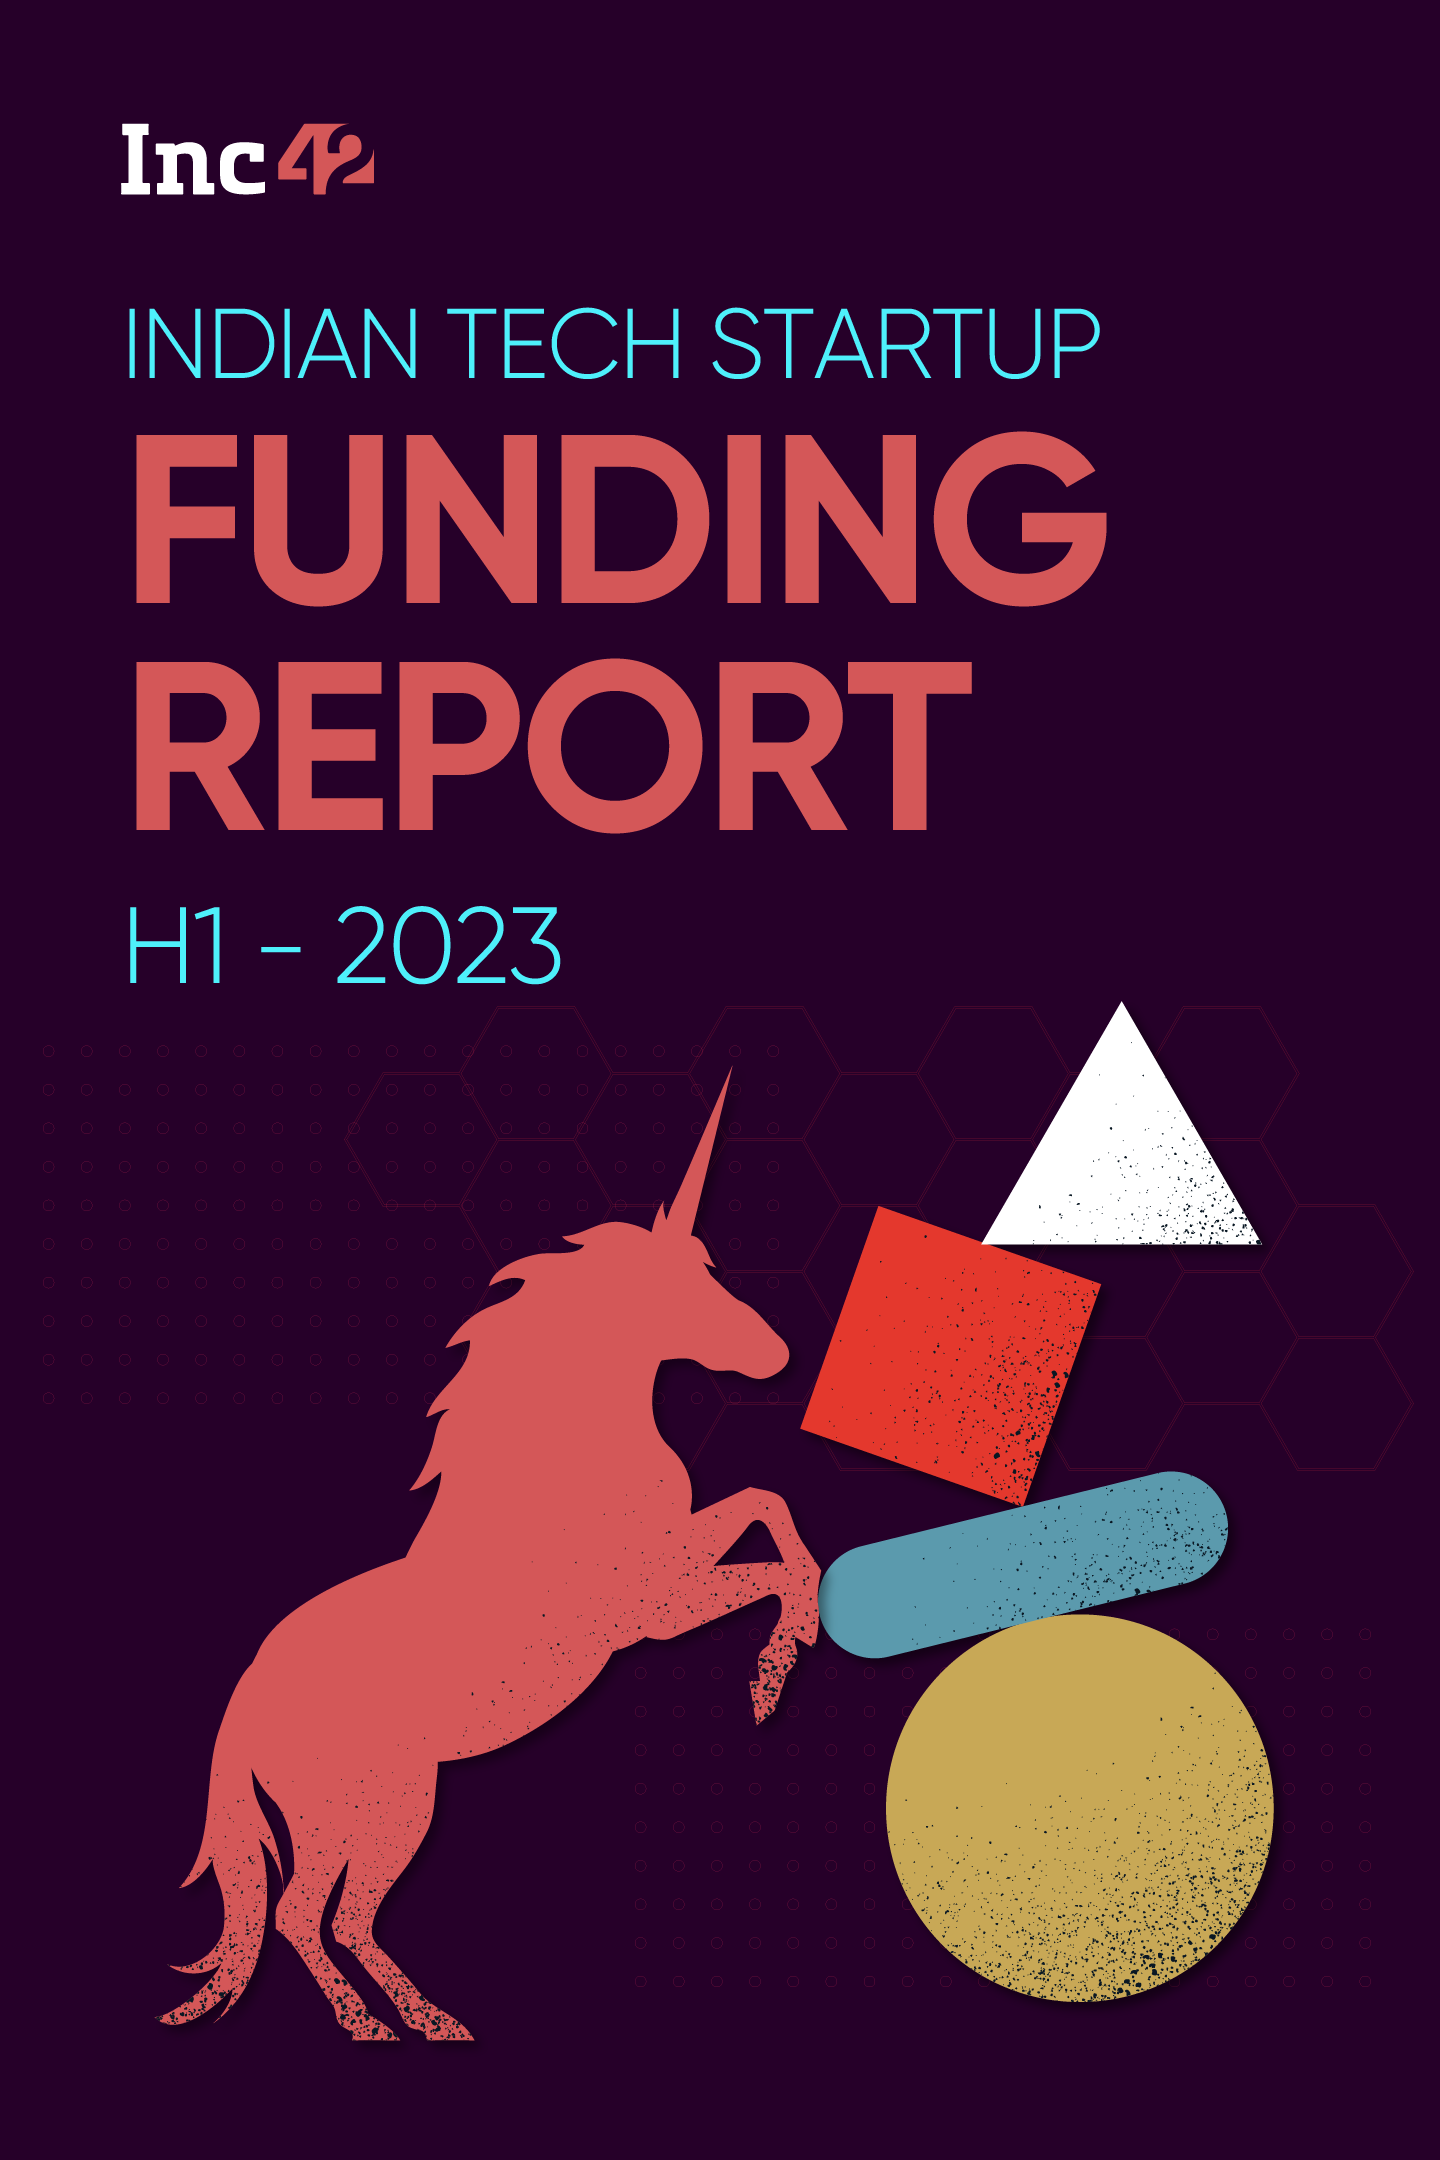 Indian Tech Startup Funding Report H1 2023